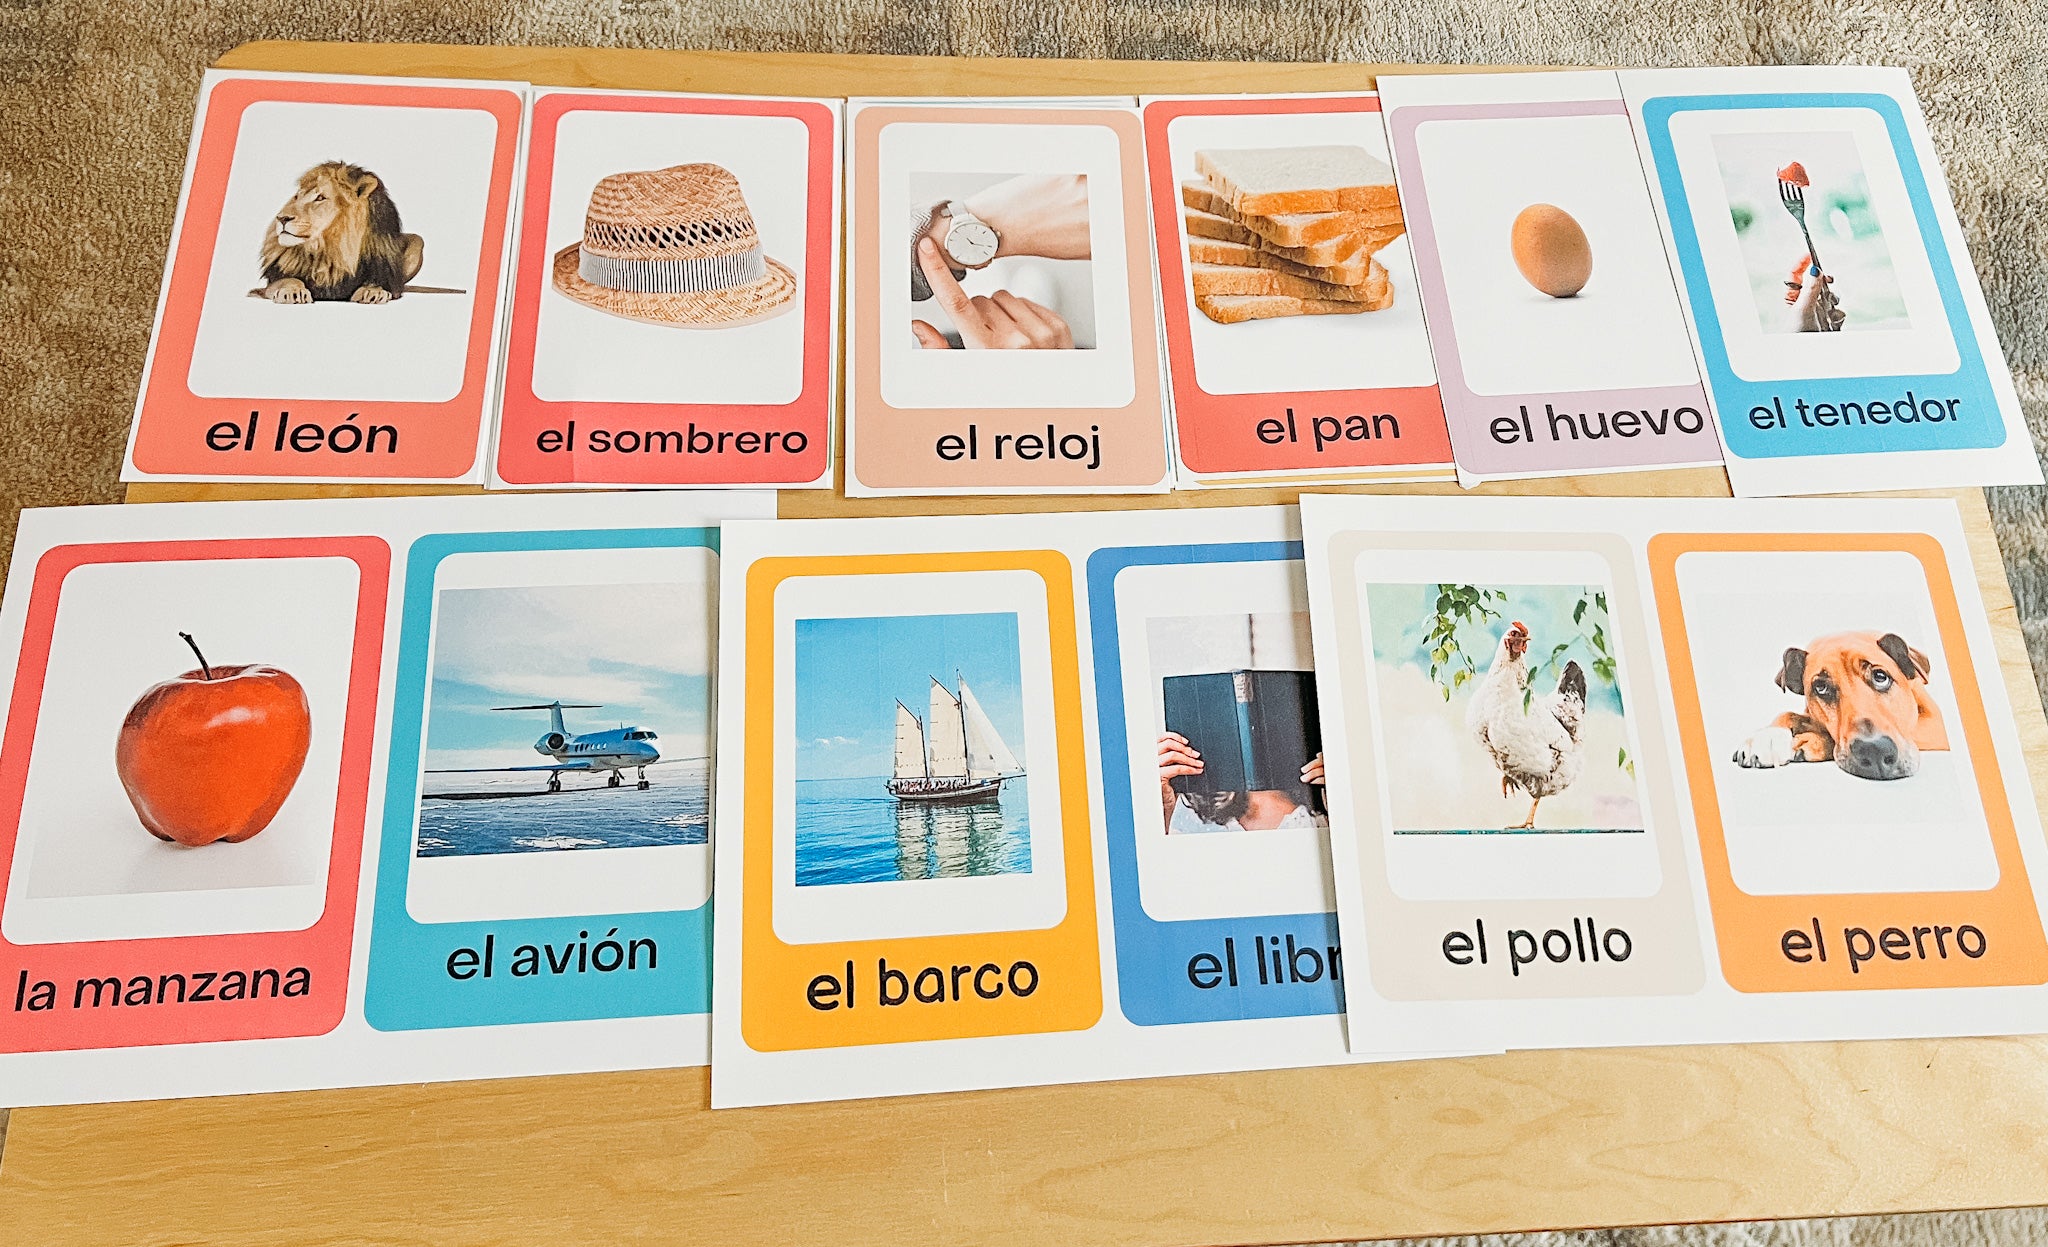 50 Spanish Words (downloadable file)